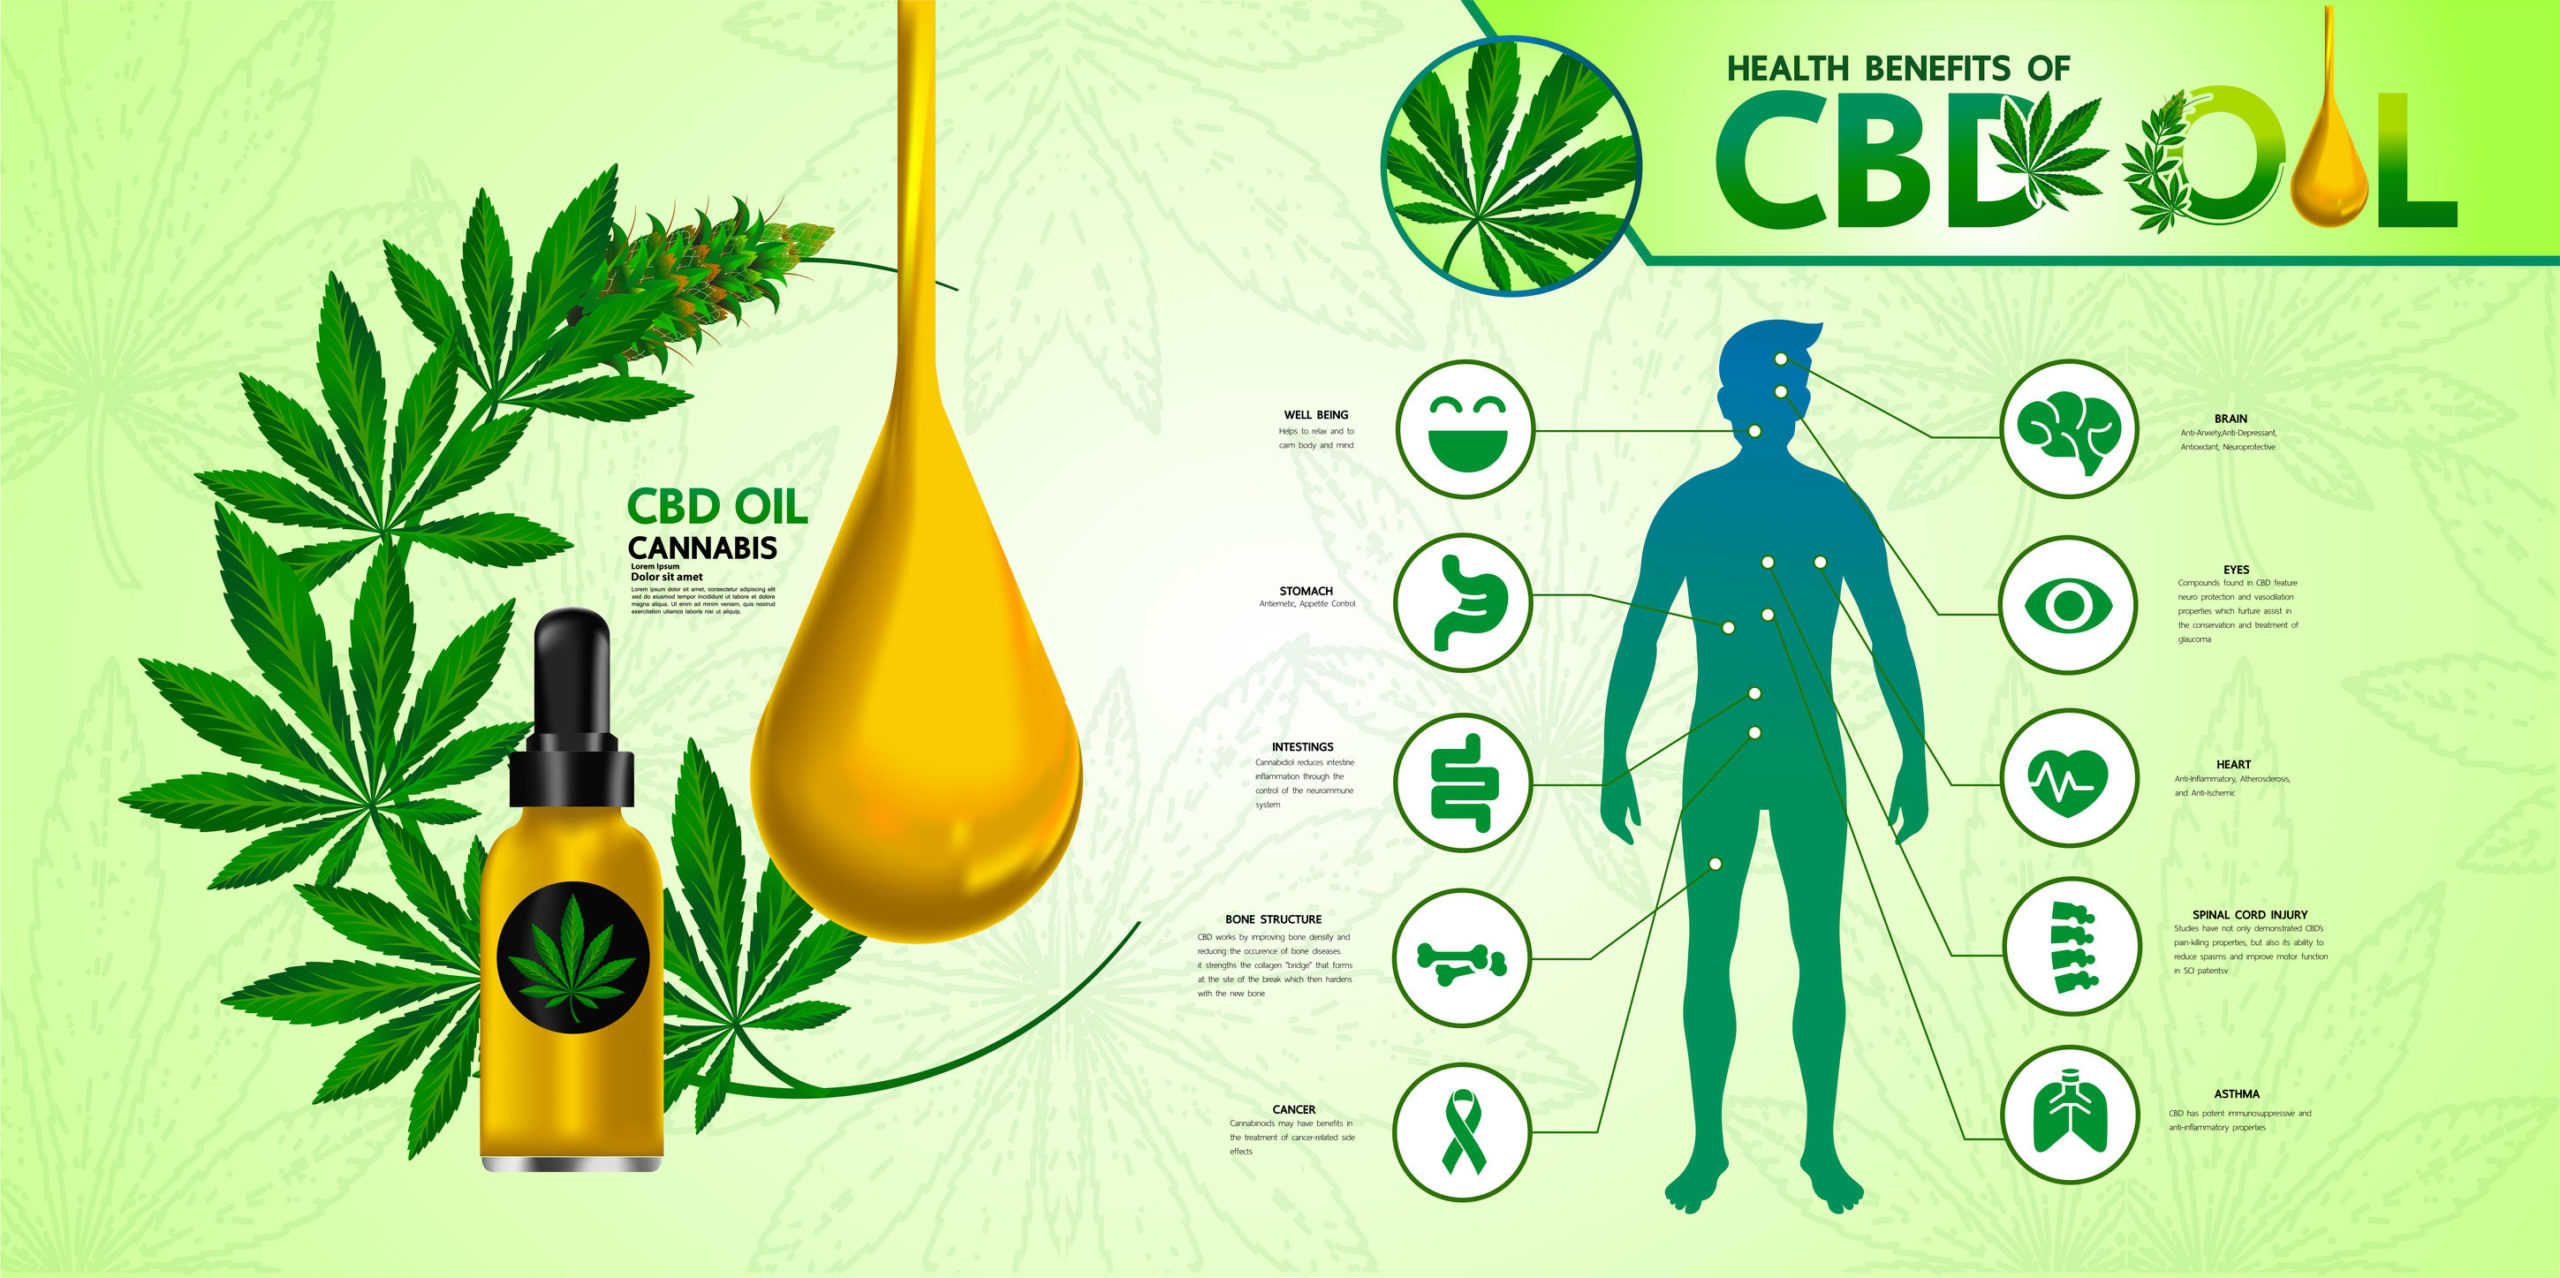 Image is an ifographic of the various ways CBD effects the human body